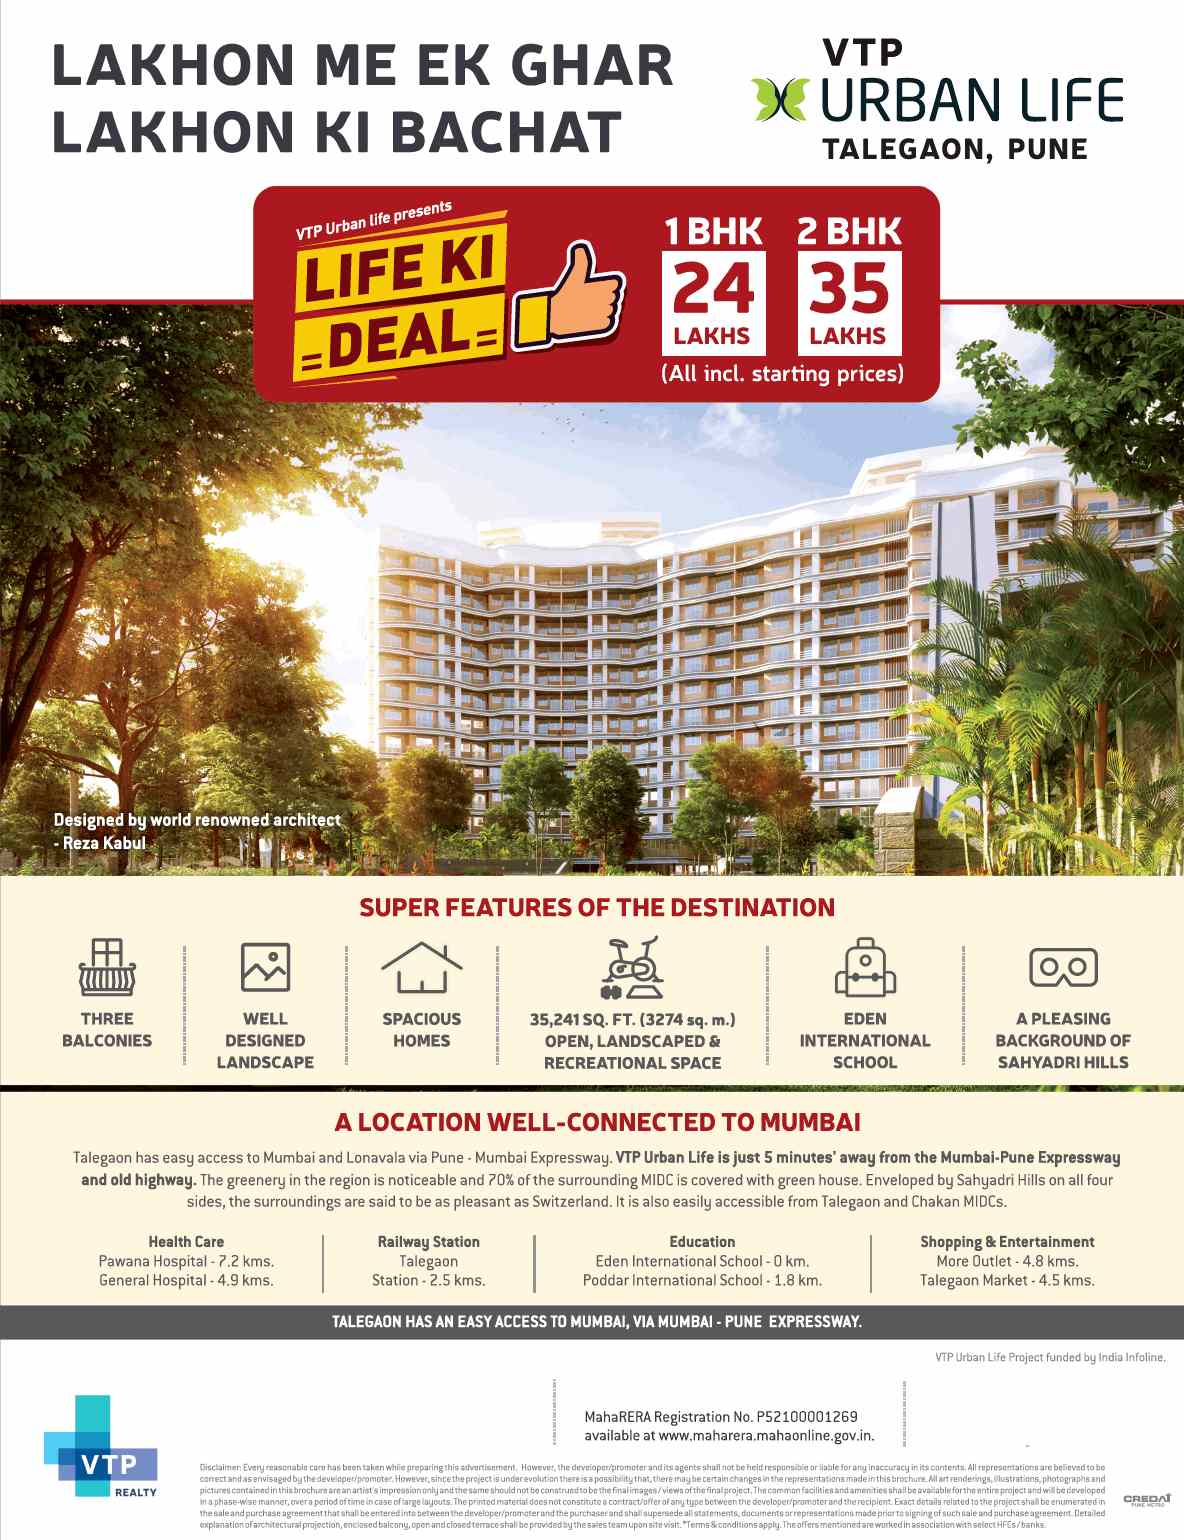 Enjoy the super features by residing at VTP Urban Life in Pune